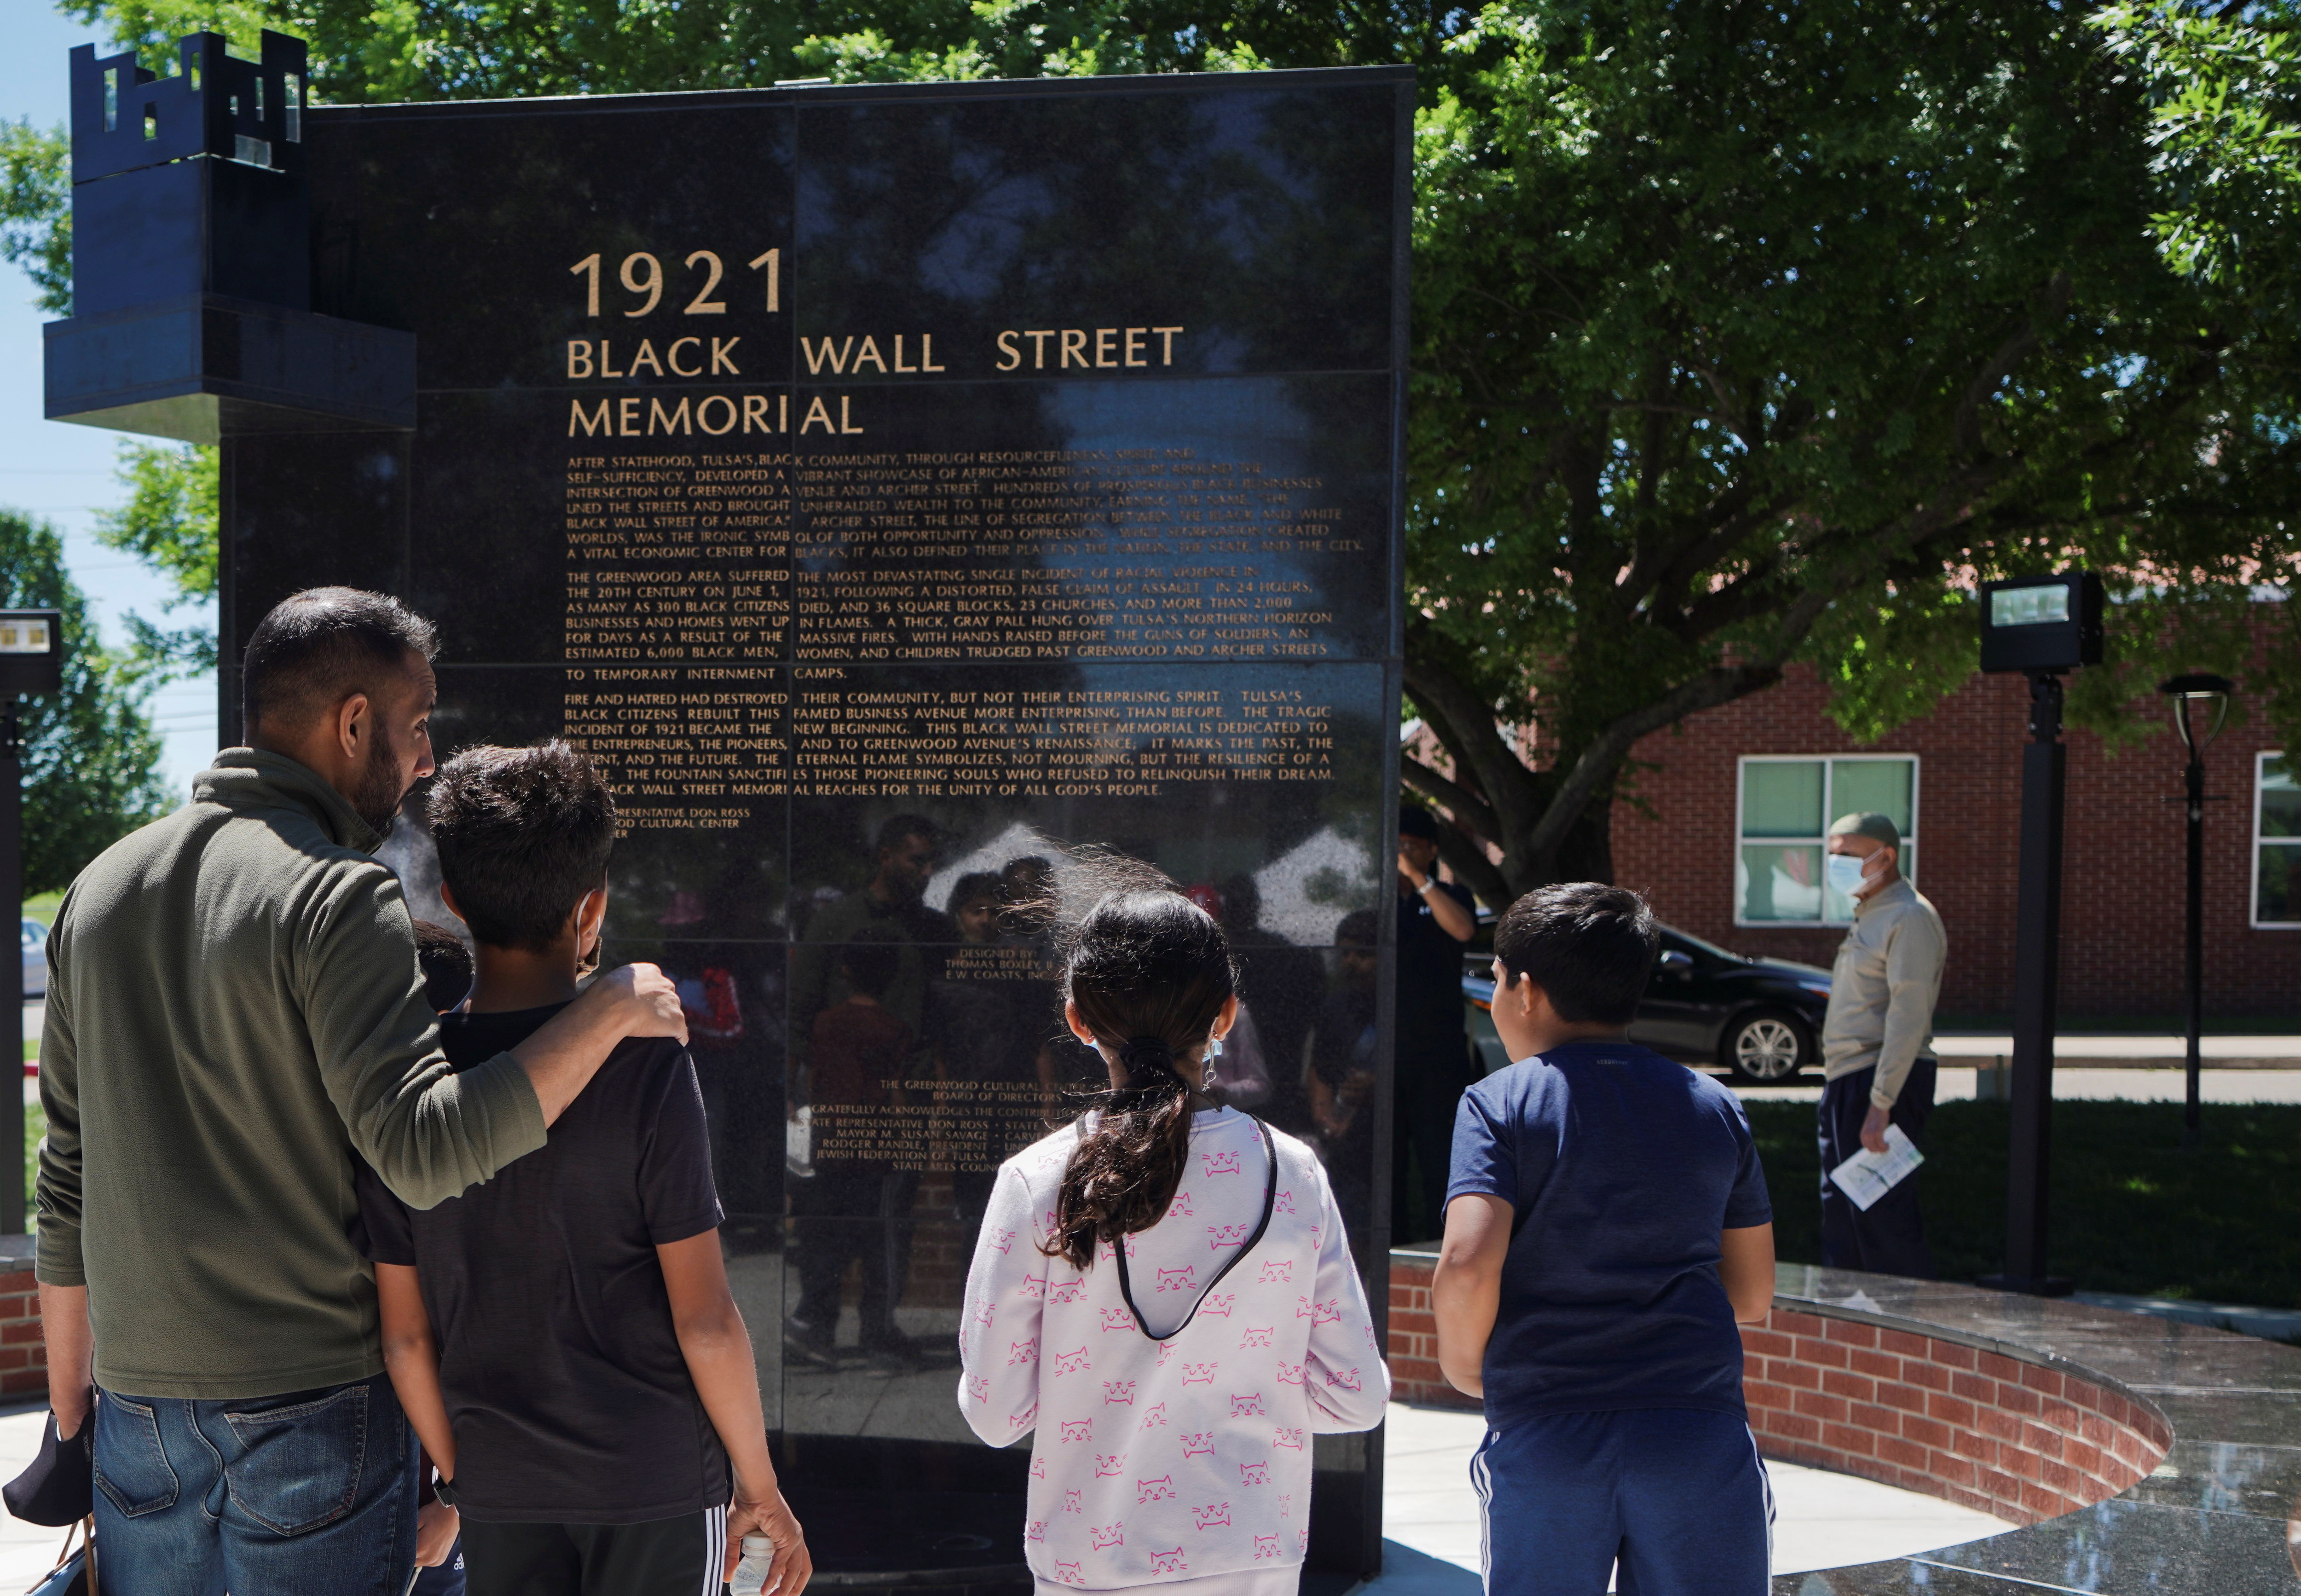 A family reads the Black Wall Street Memorial during festivities of the 100 year anniversary of the 1921 Tulsa Massacre in Tulsa